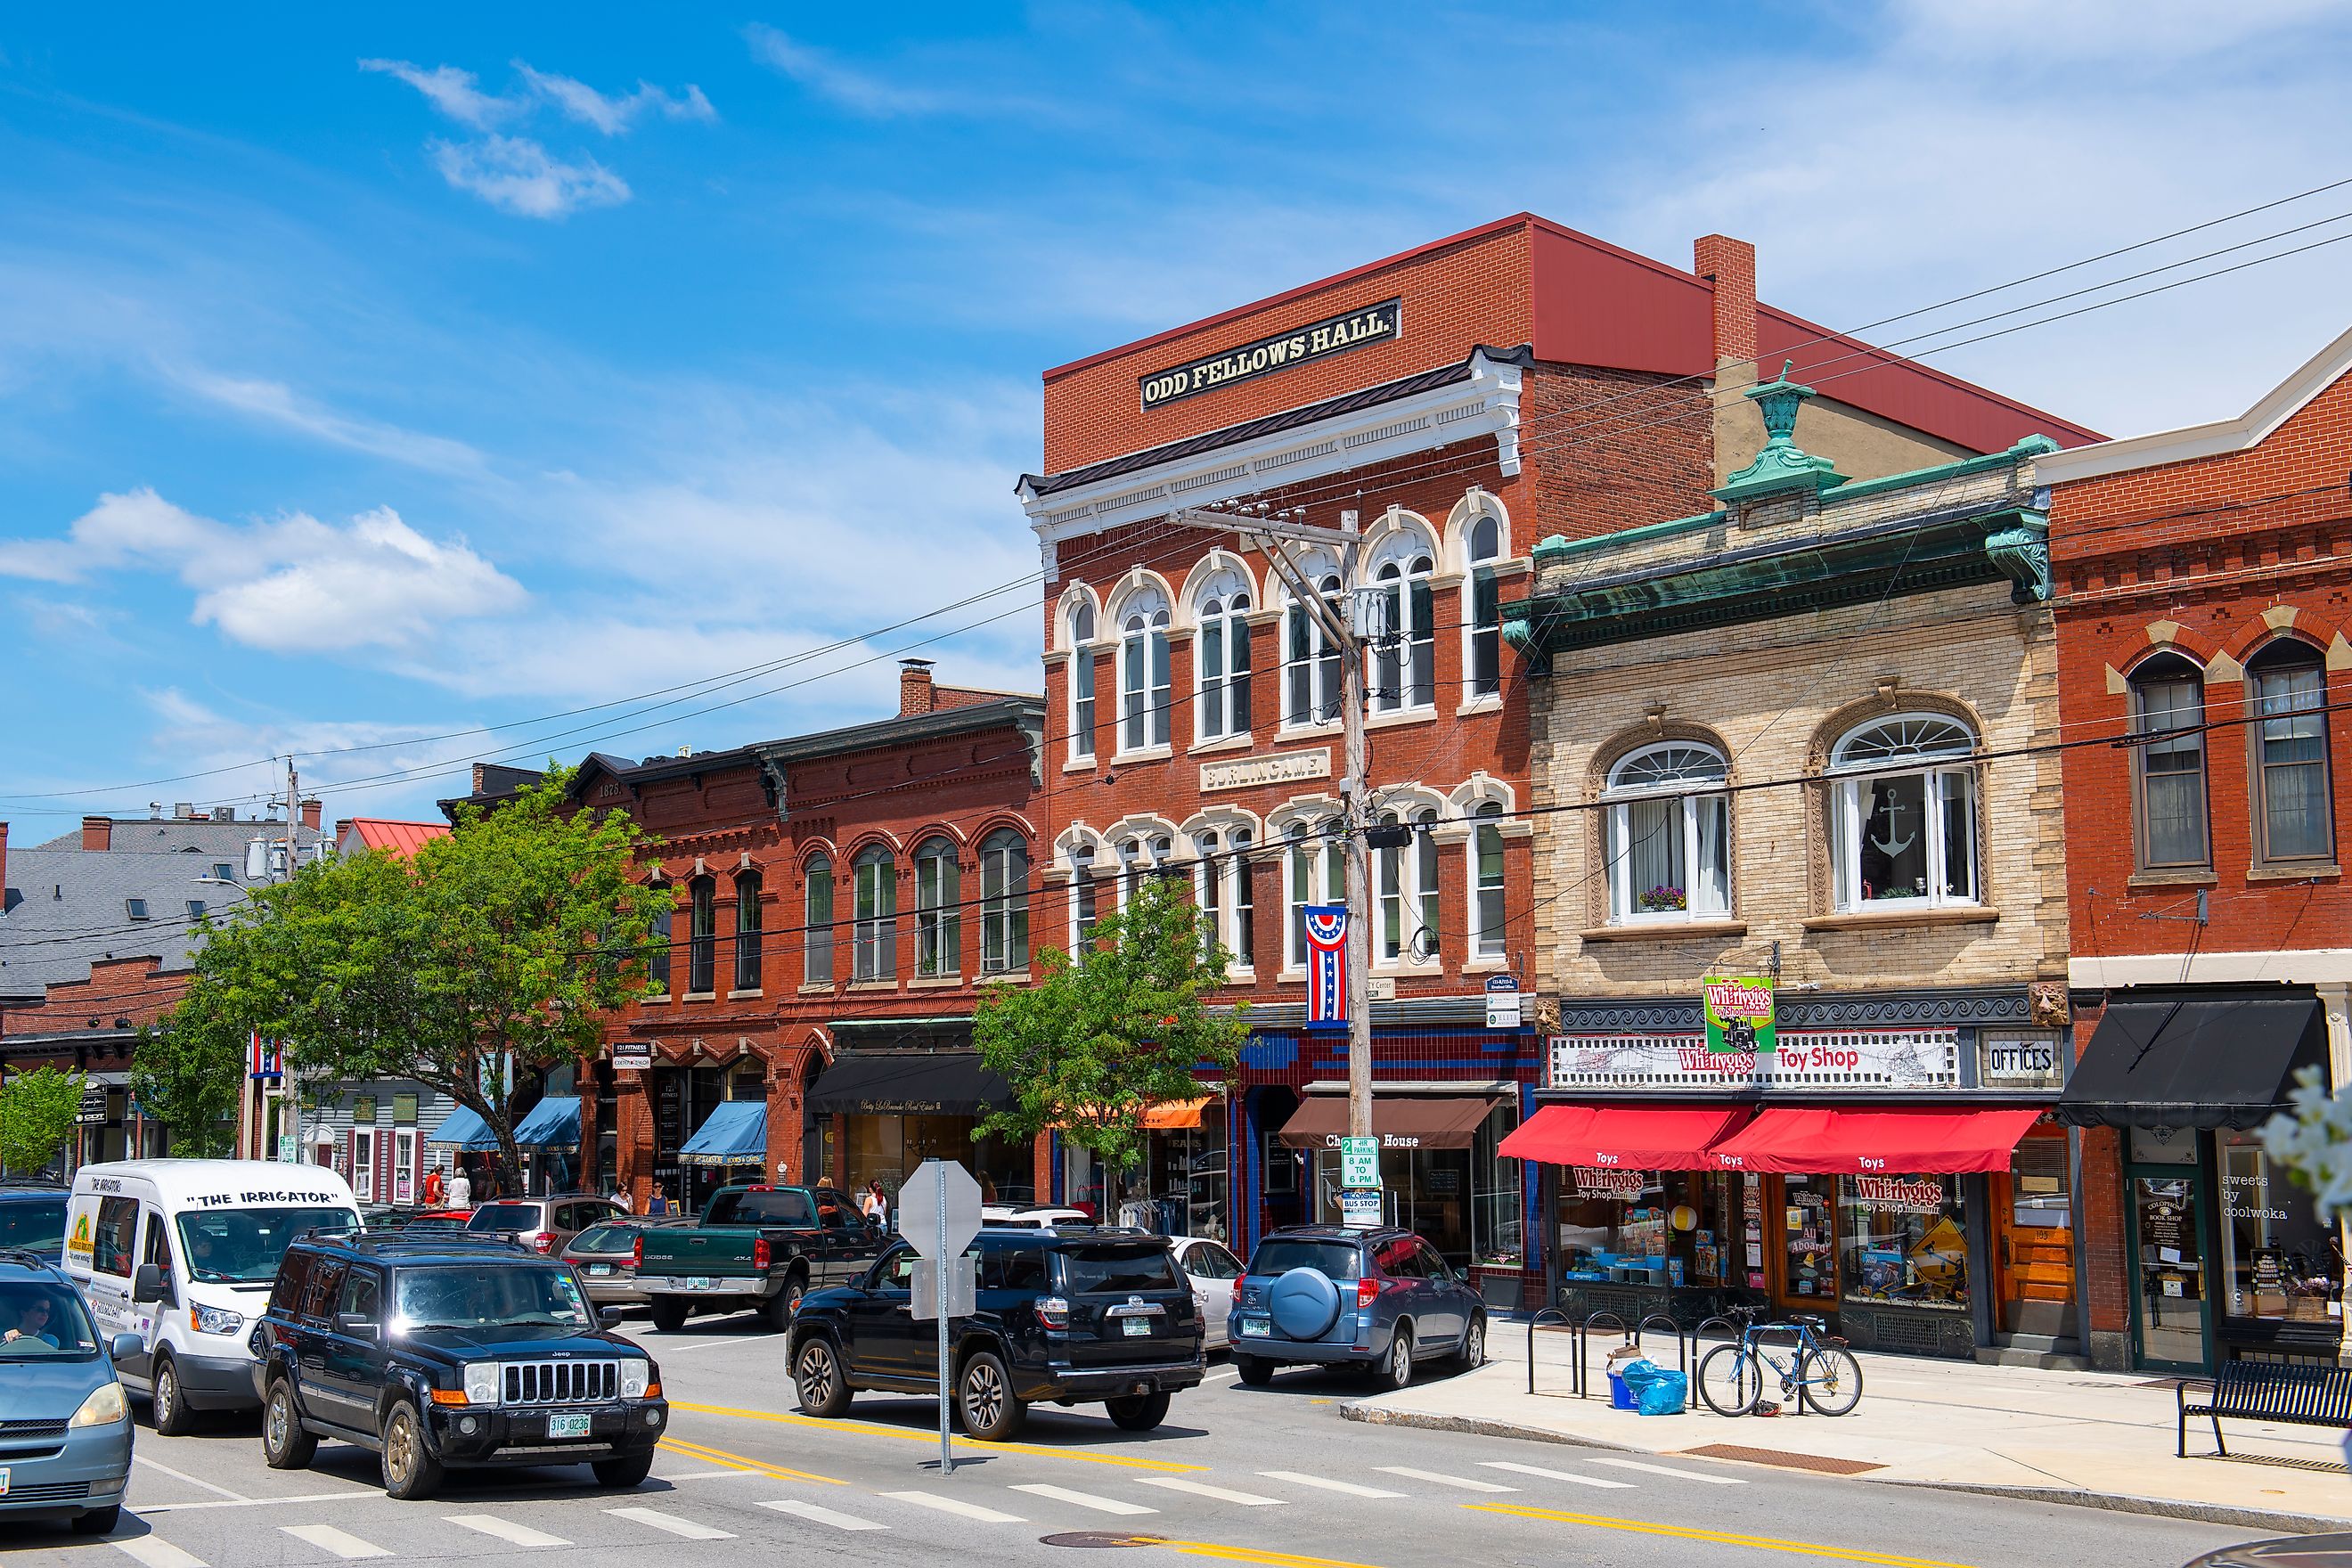 Historic town center of Exeter, New Hampshire. Image credit Wangkun Jia via Shutterstock.com